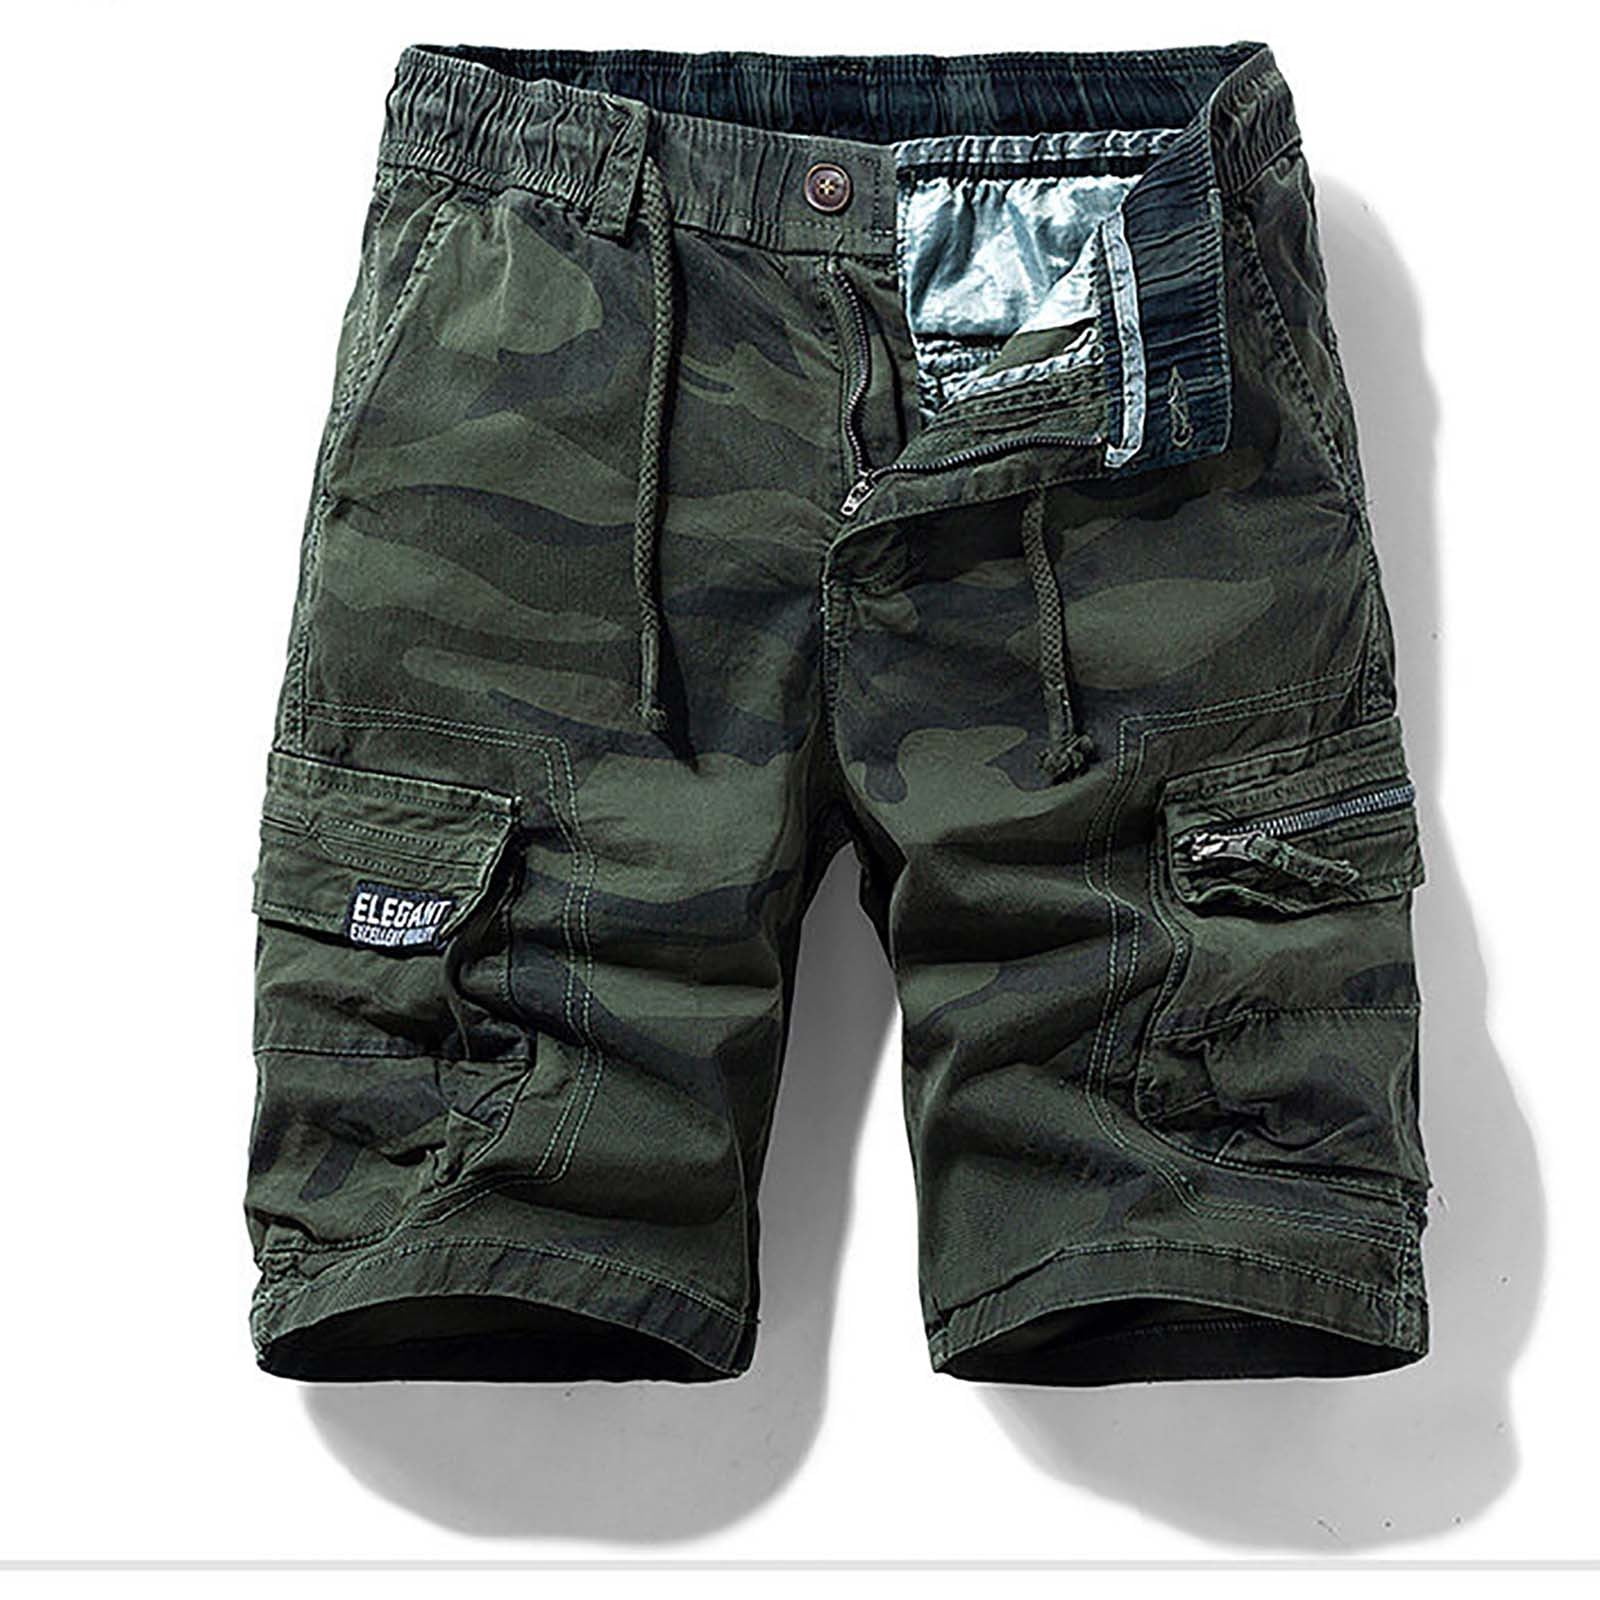 Leesechin Deals Mens Shorts Trousers Multi Pocket Cargo Pants Loose ...